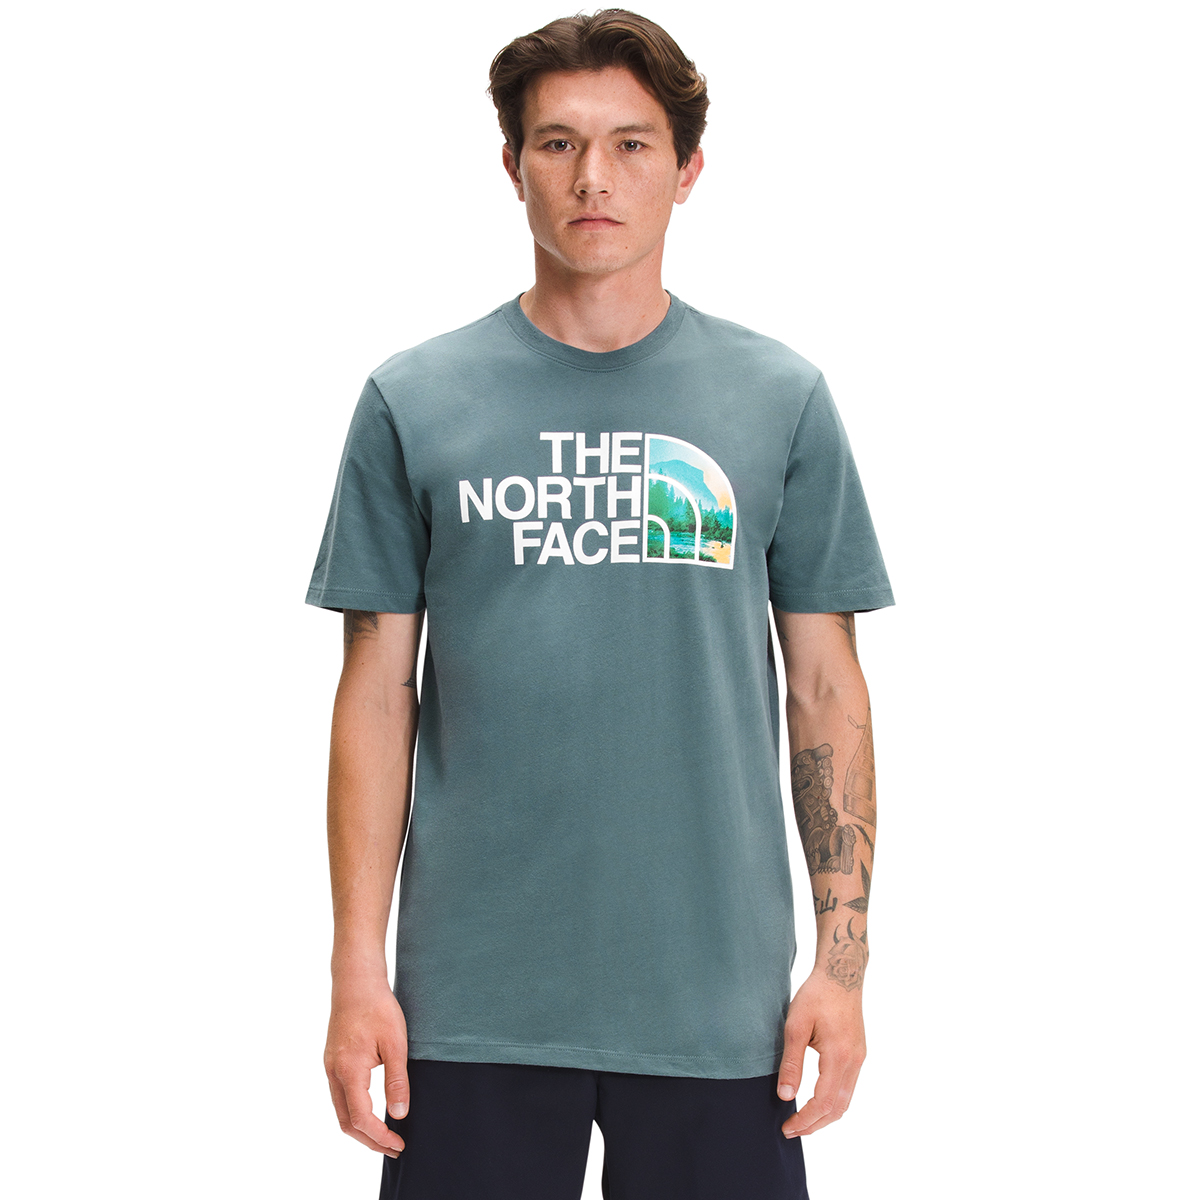 The North Face Men's Short-Sleeve Half Dome Tee - Size XXL